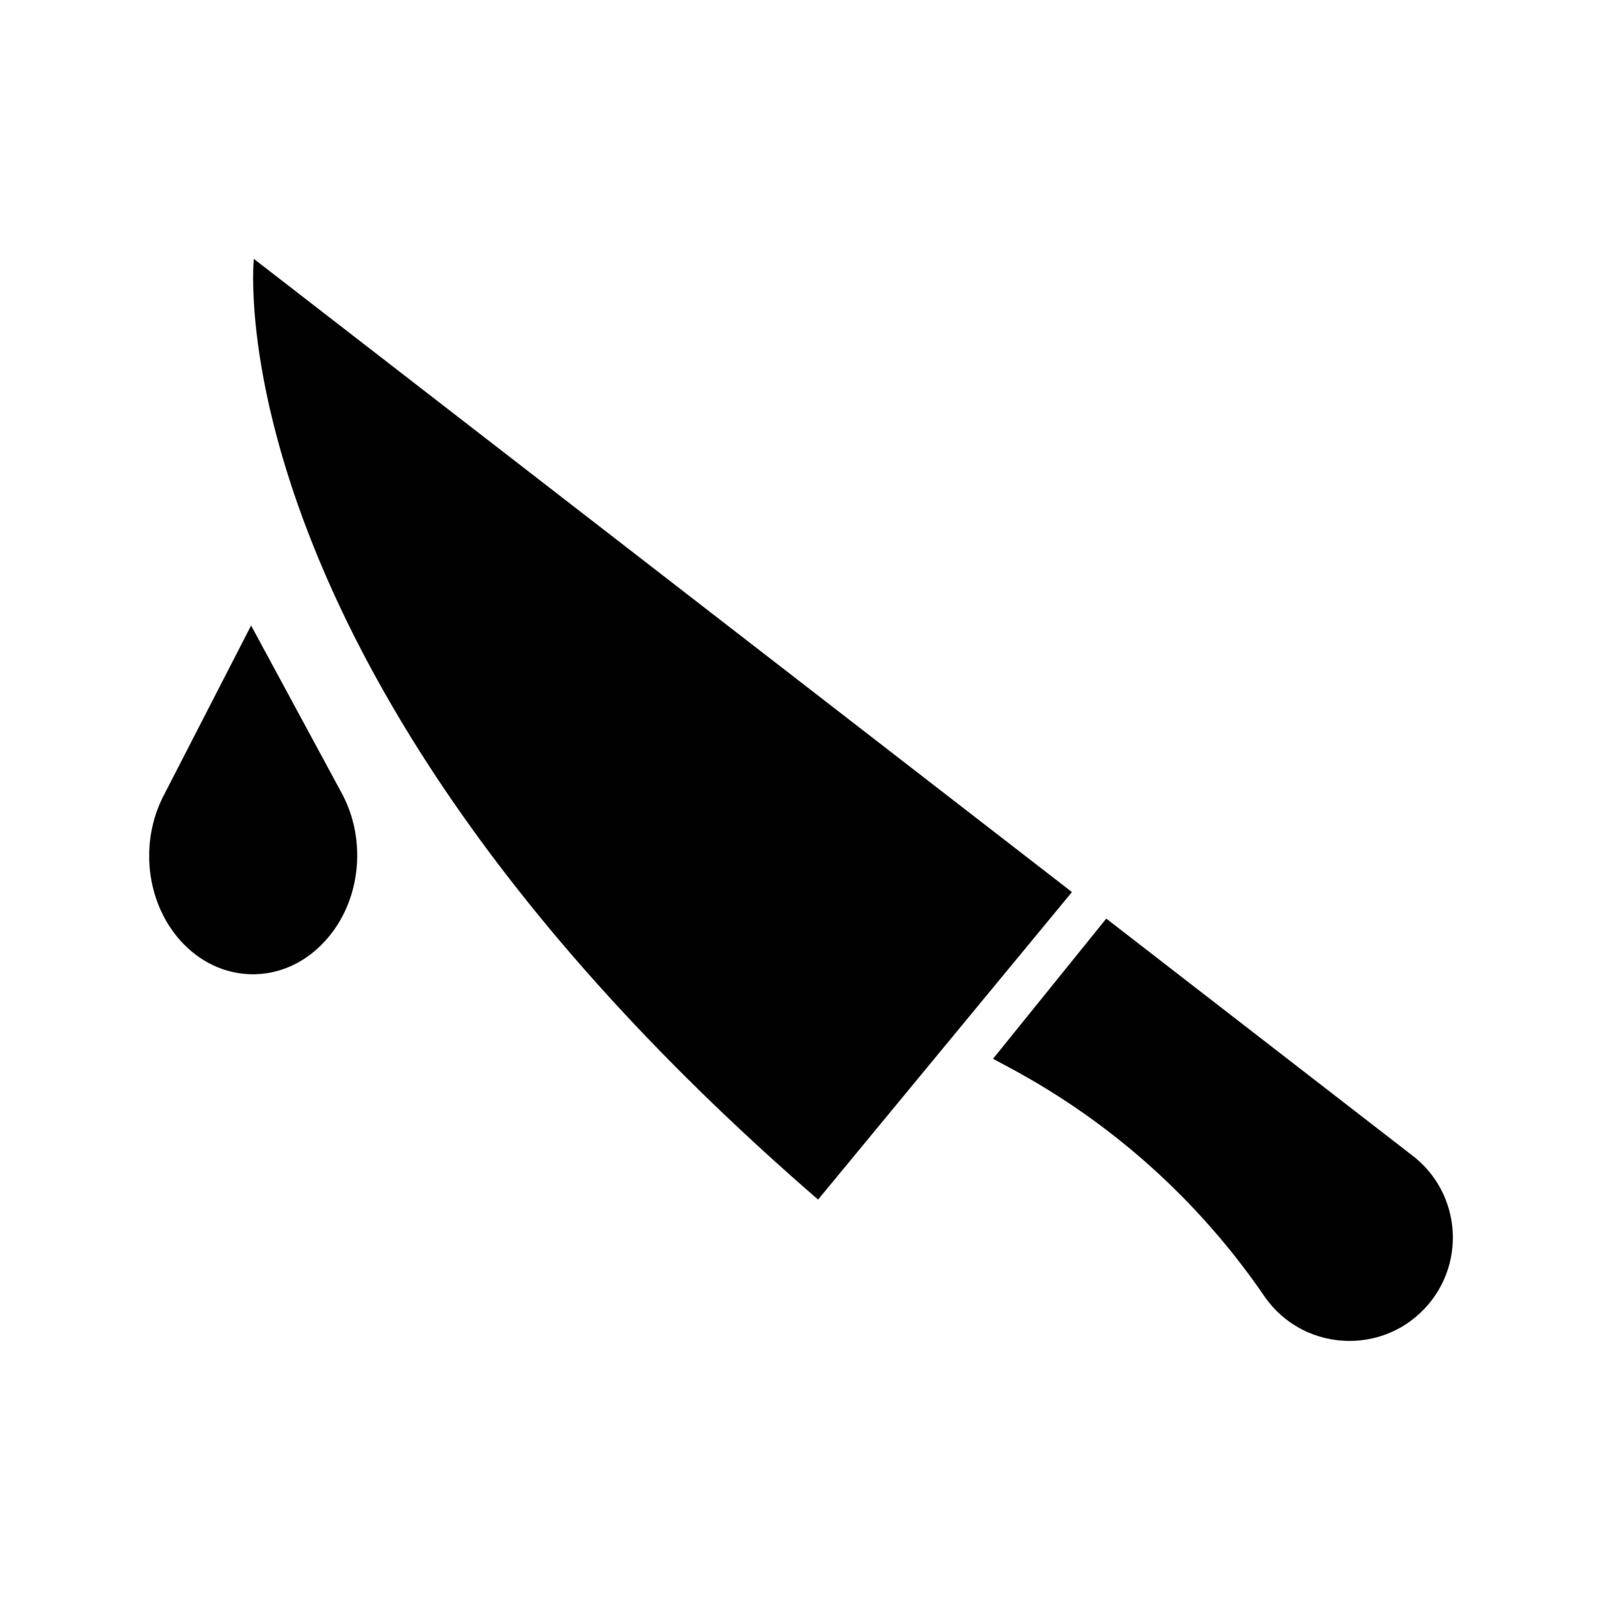 Knife and drop of blood pictogram vector illustration.